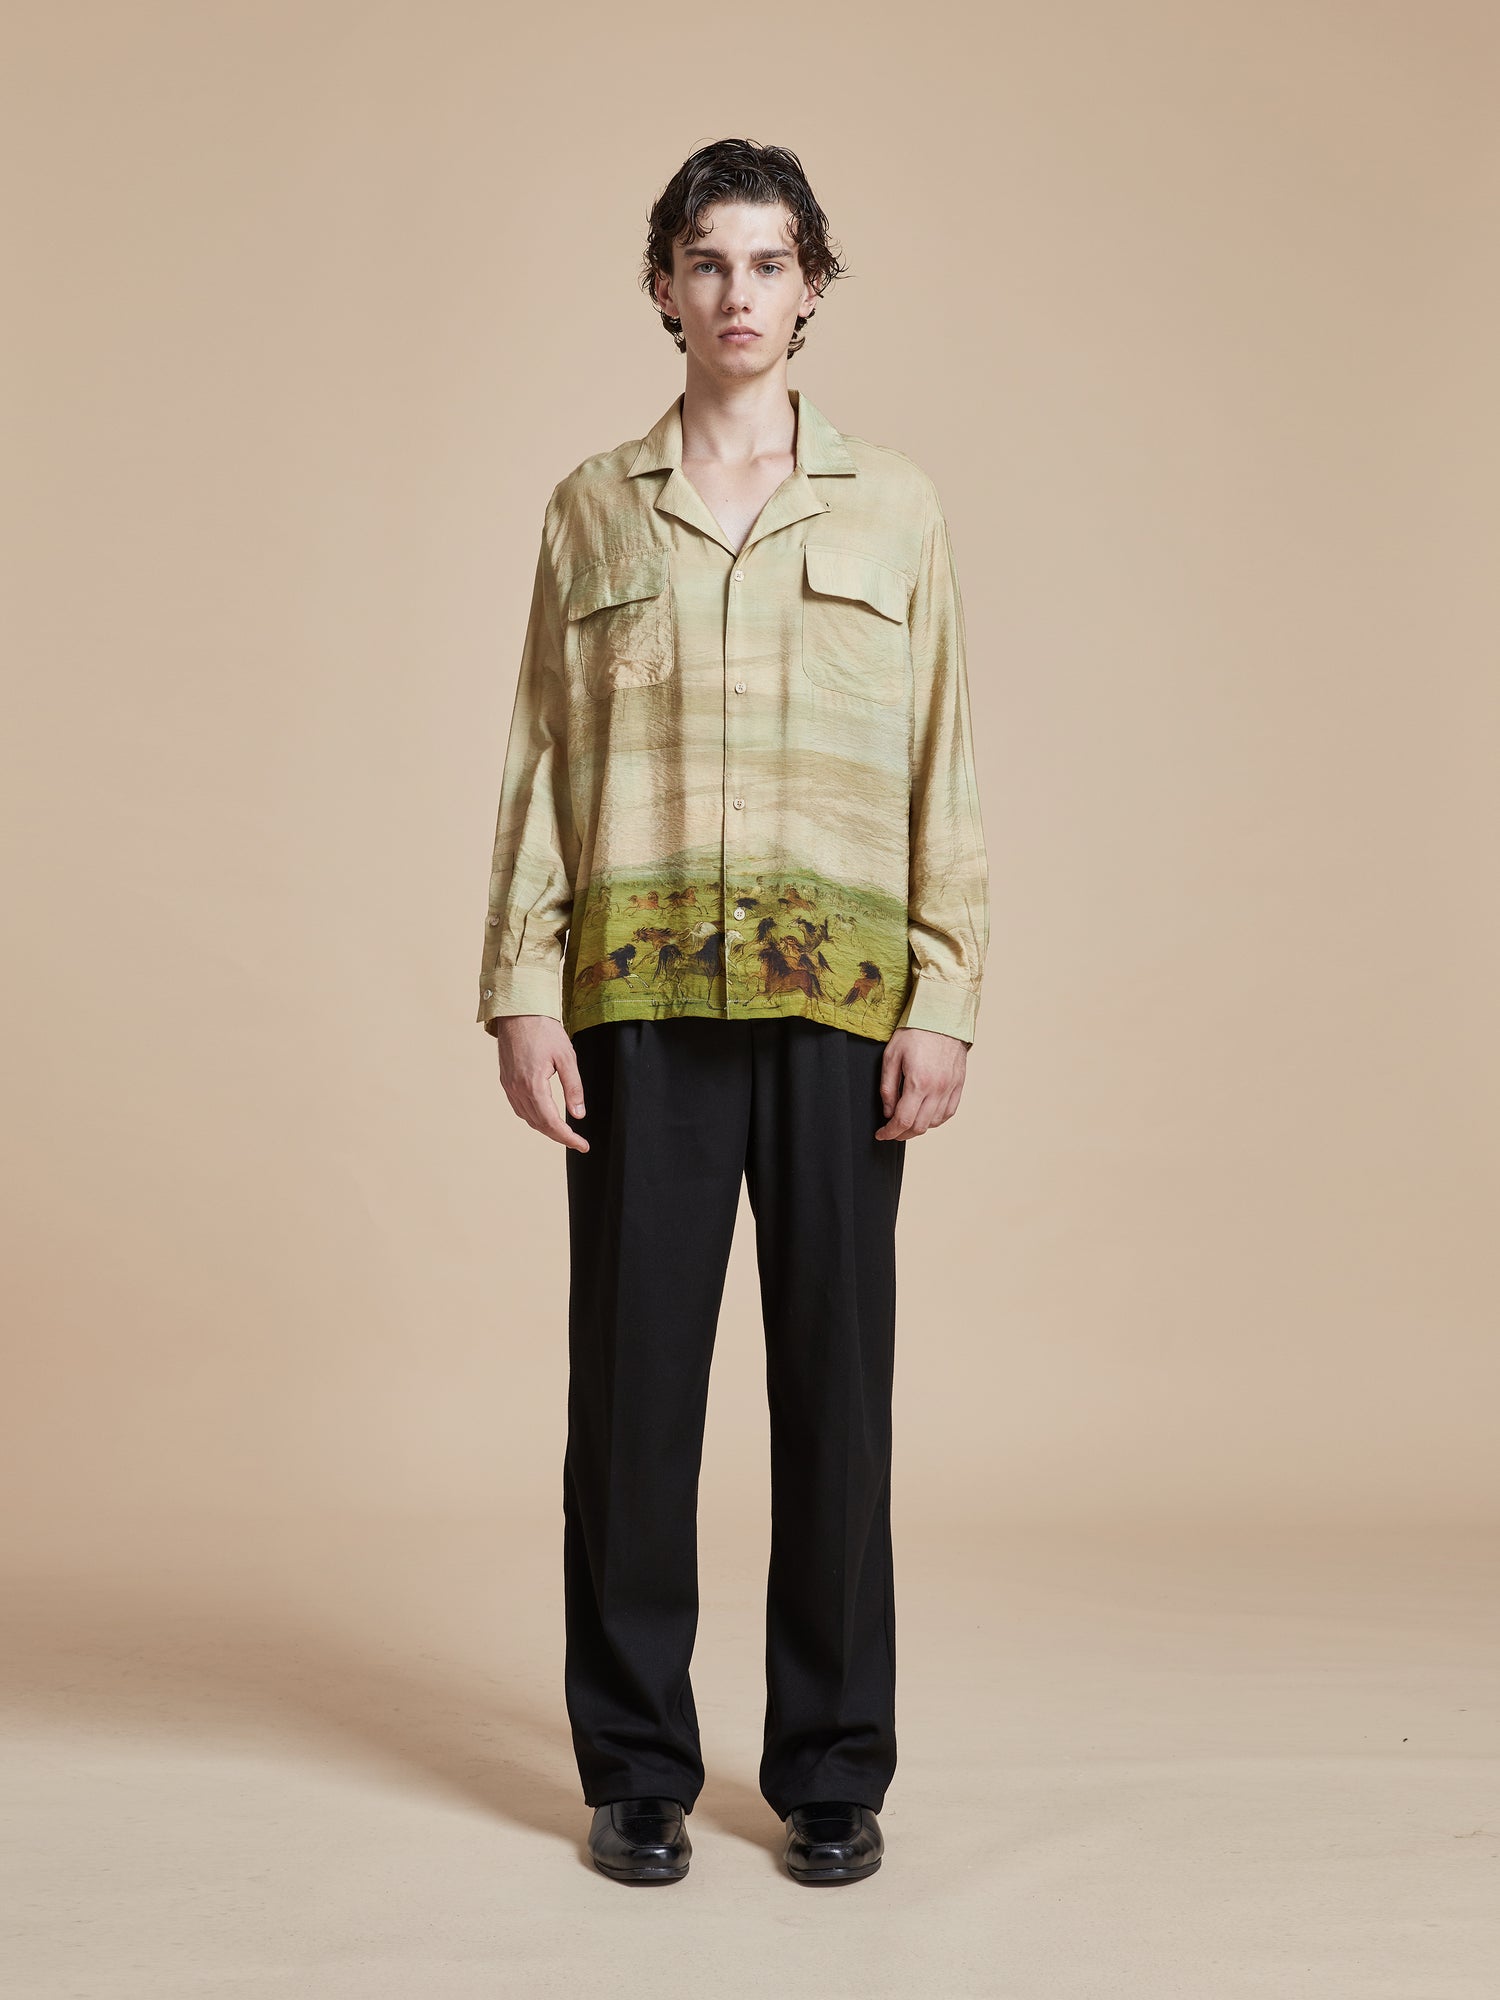 A model wearing a nature-inspired Grasslands Long Sleeve Camp Shirt with a print on it, inspired by Phulkari motifs, from the brand Found.